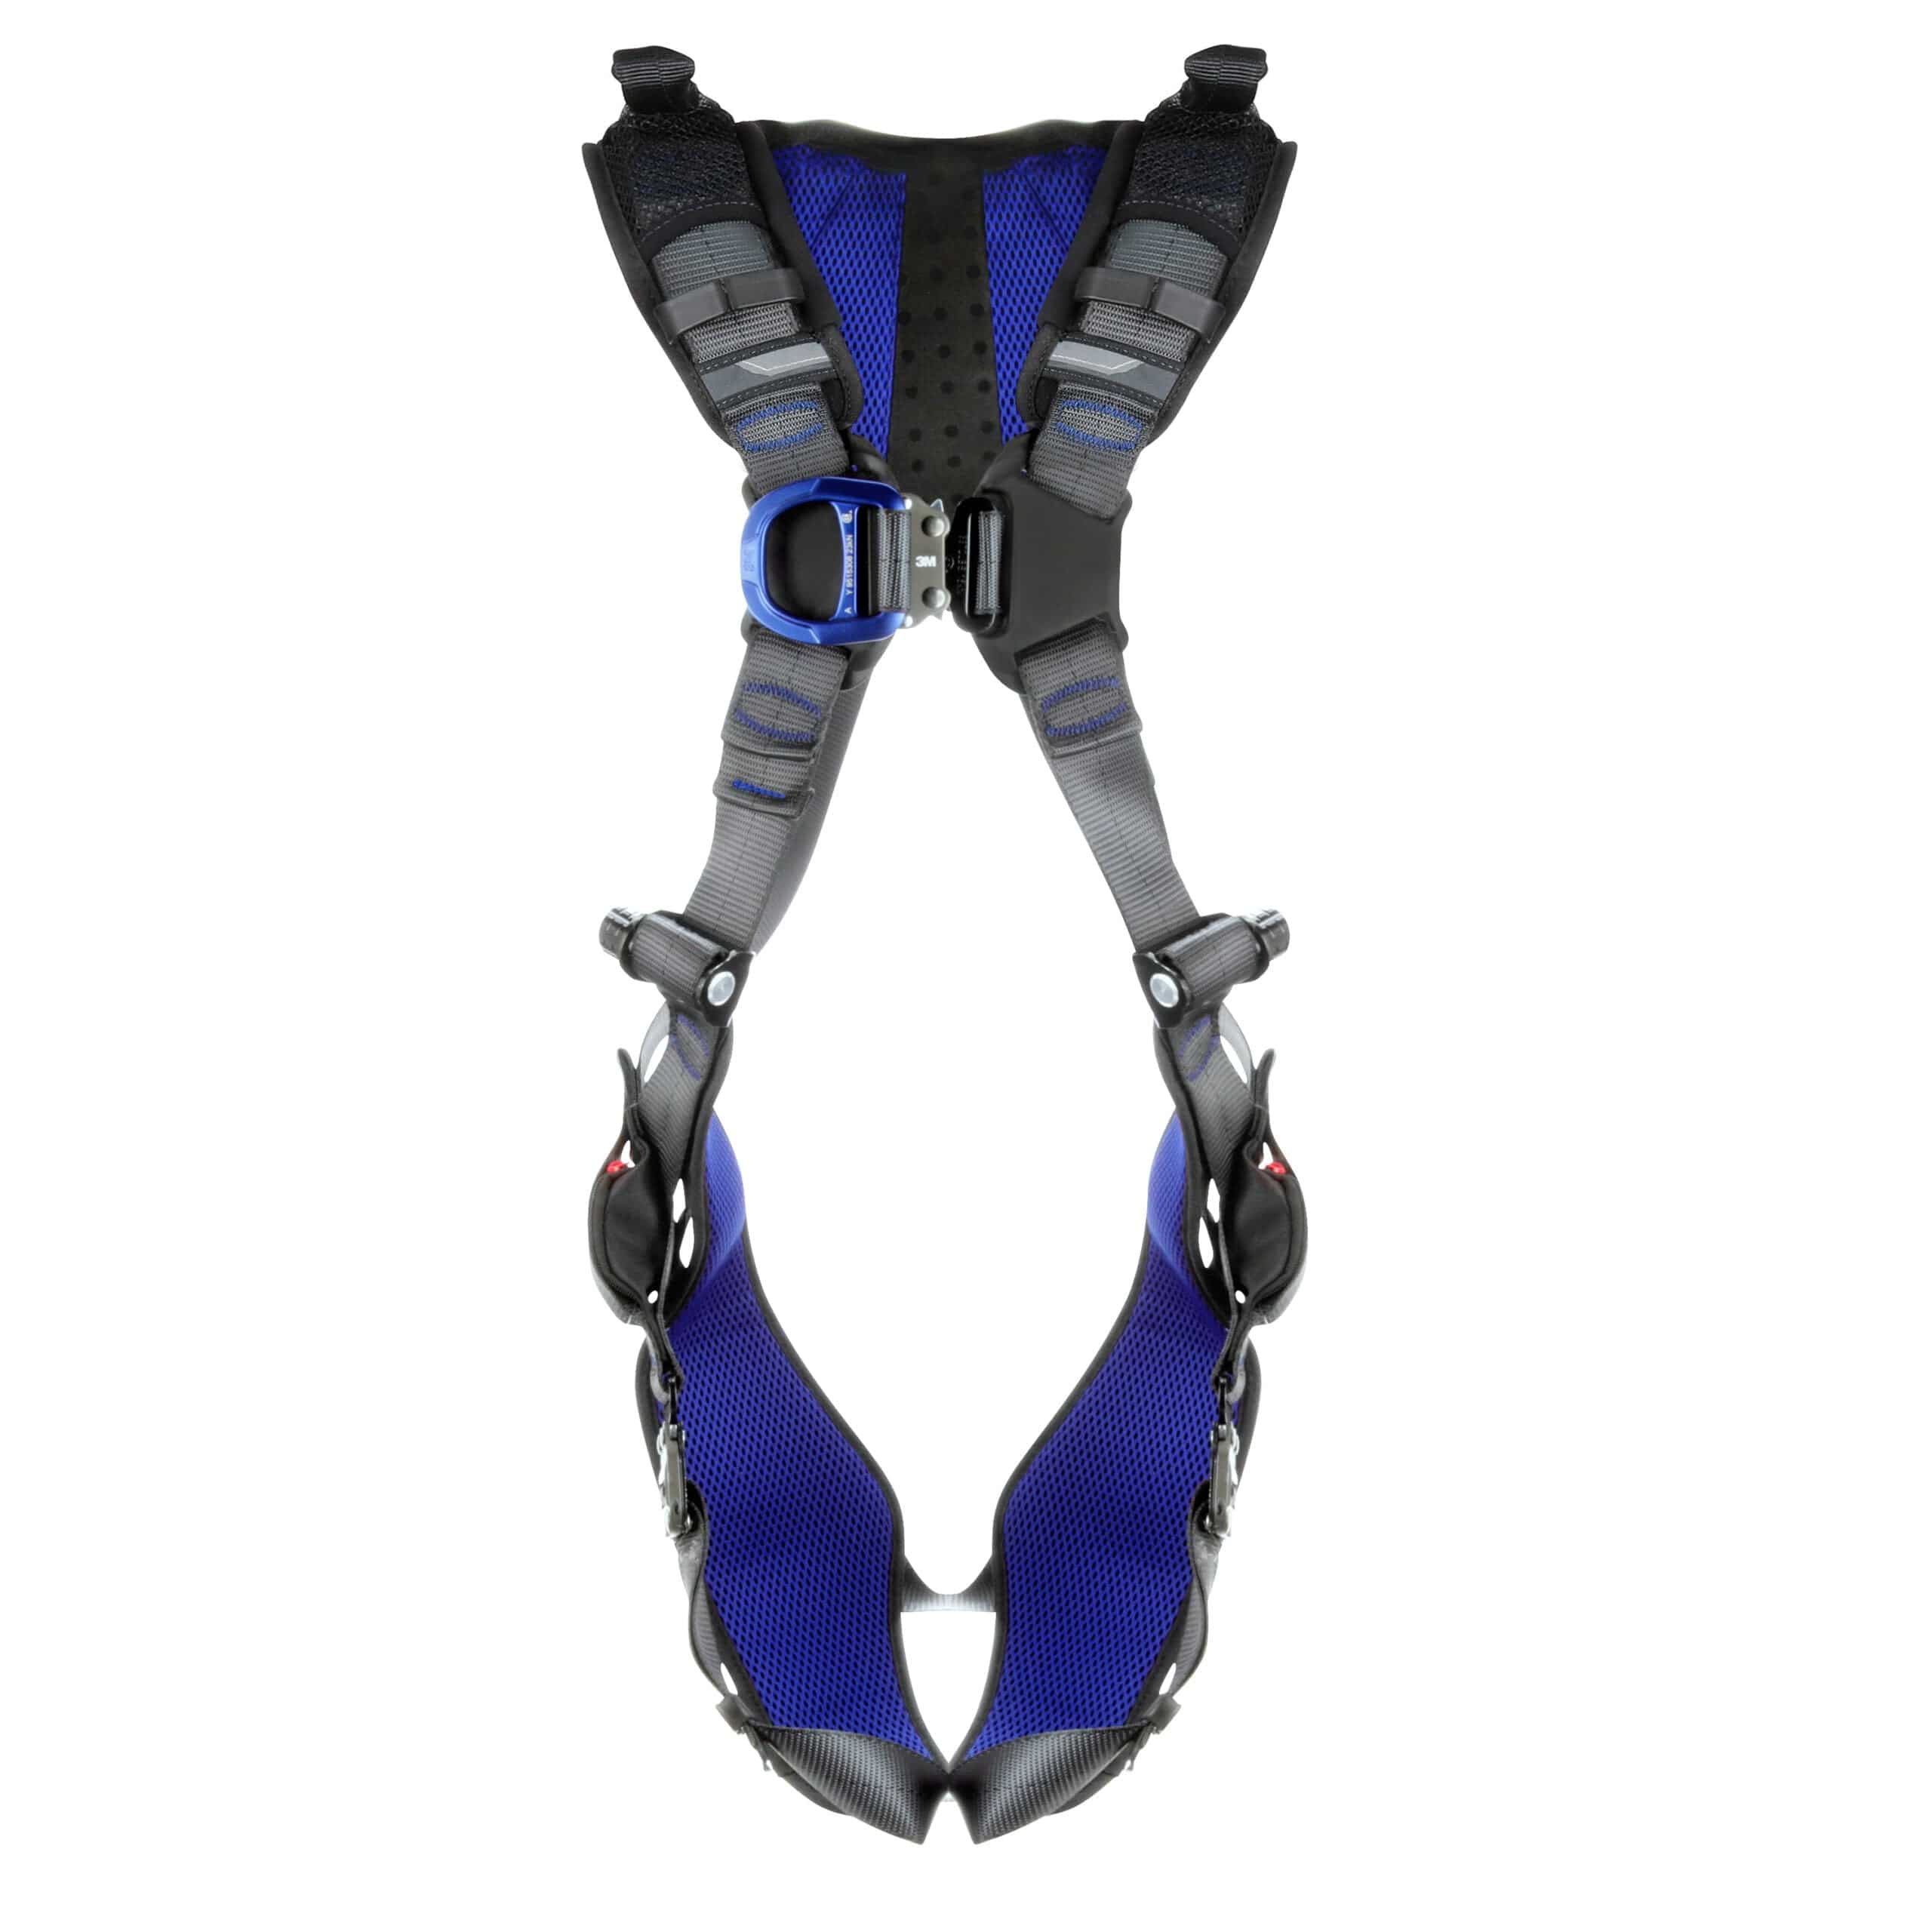 3M DBI SALA ExoFit XE200 Comfort Rescue Safety Harness - SecureHeights